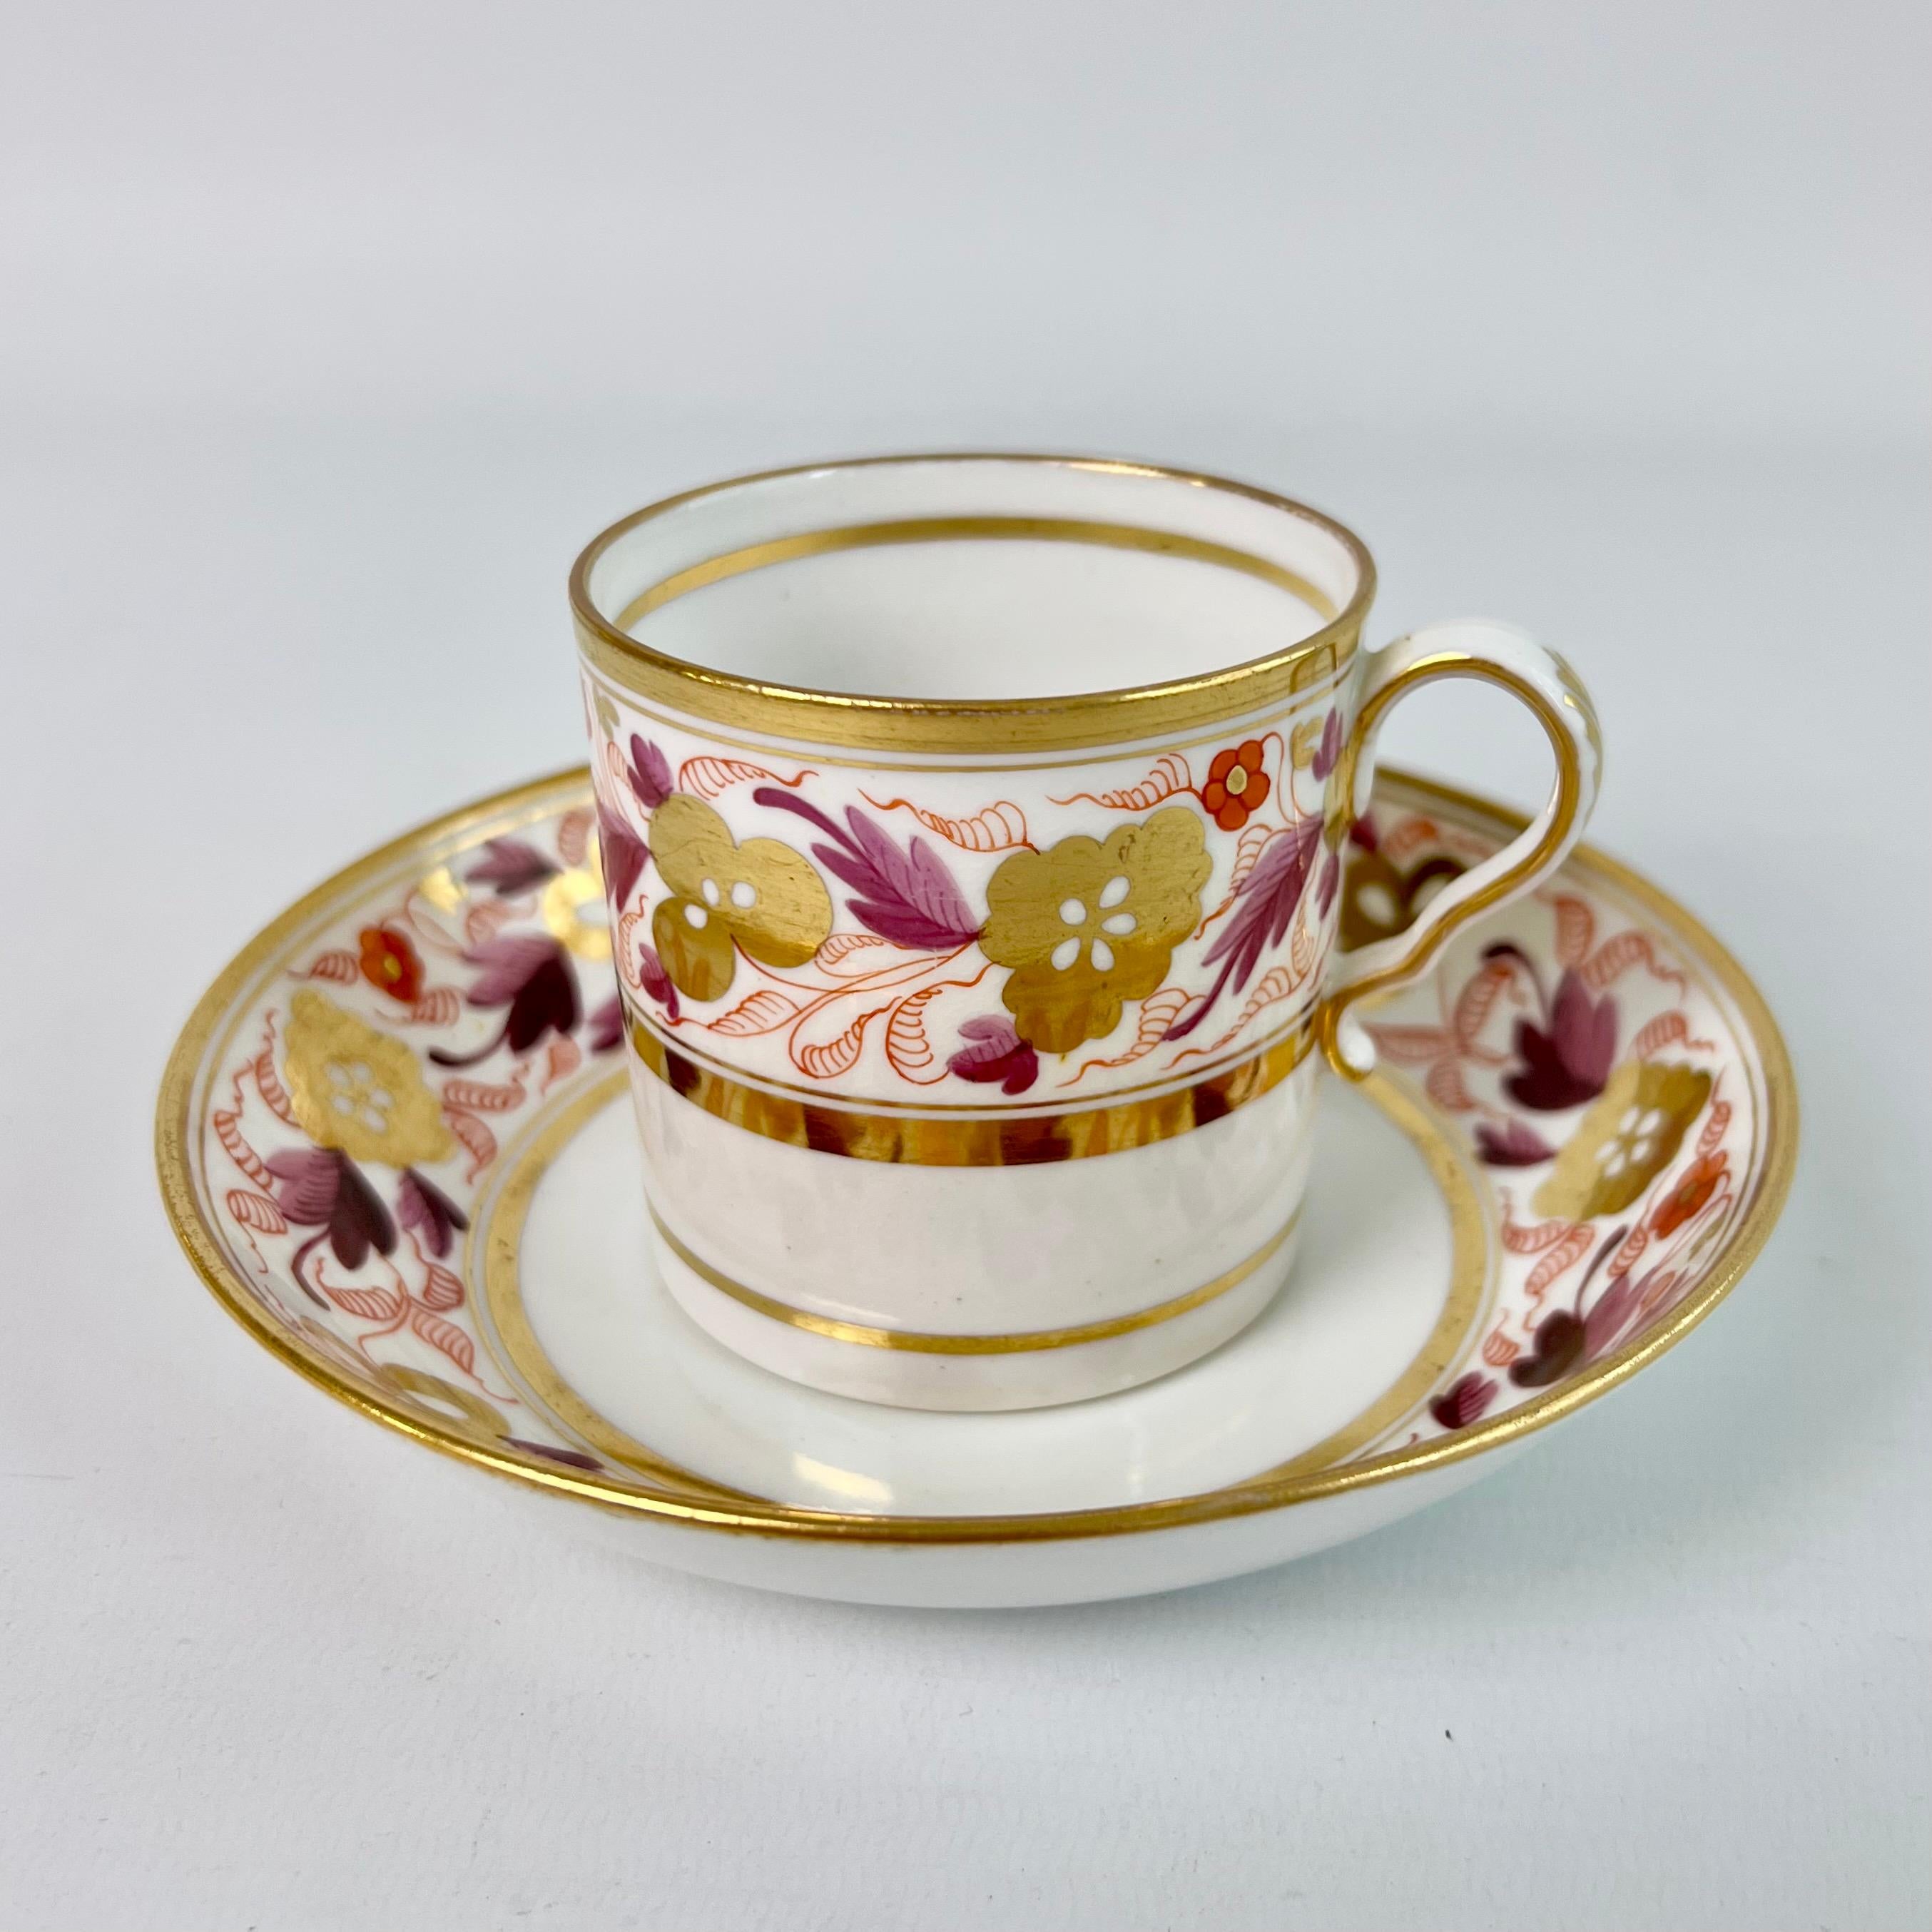 Regency Spode Porcelain Teacup Trio, Puce and Gilt Floral Pattern, Neoclassical ca 1810